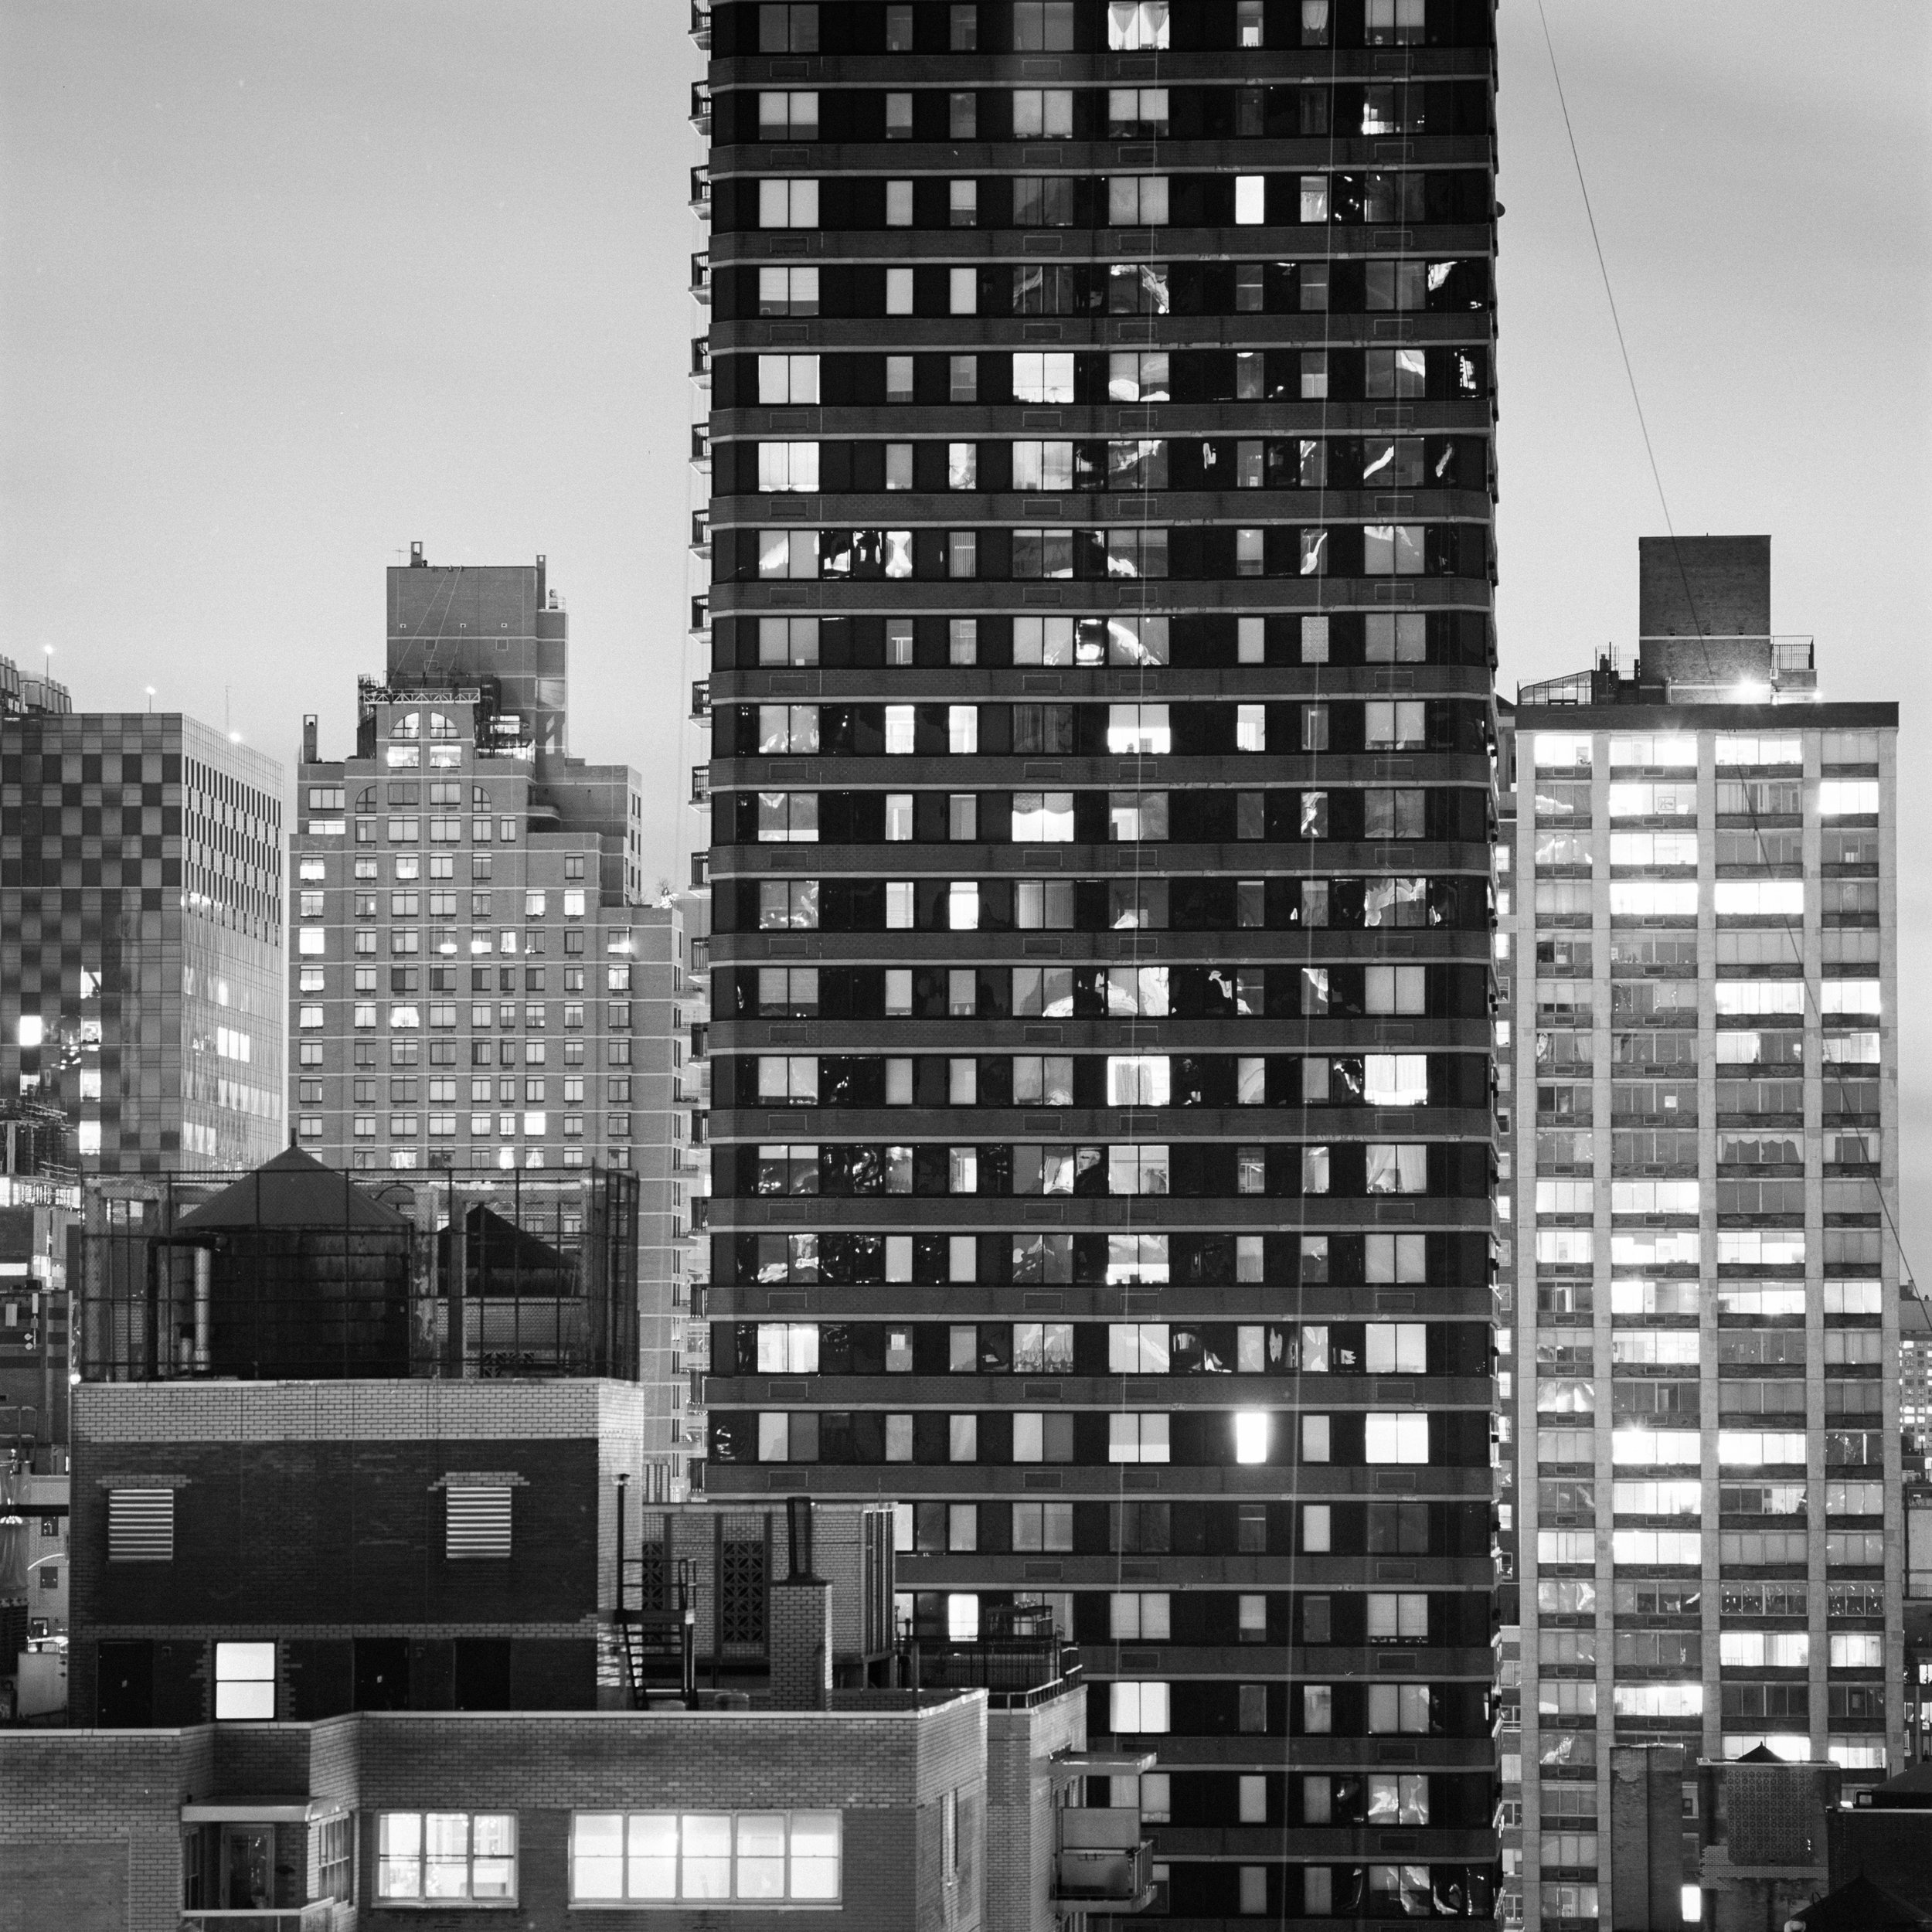 nycarchitecture-29.jpg